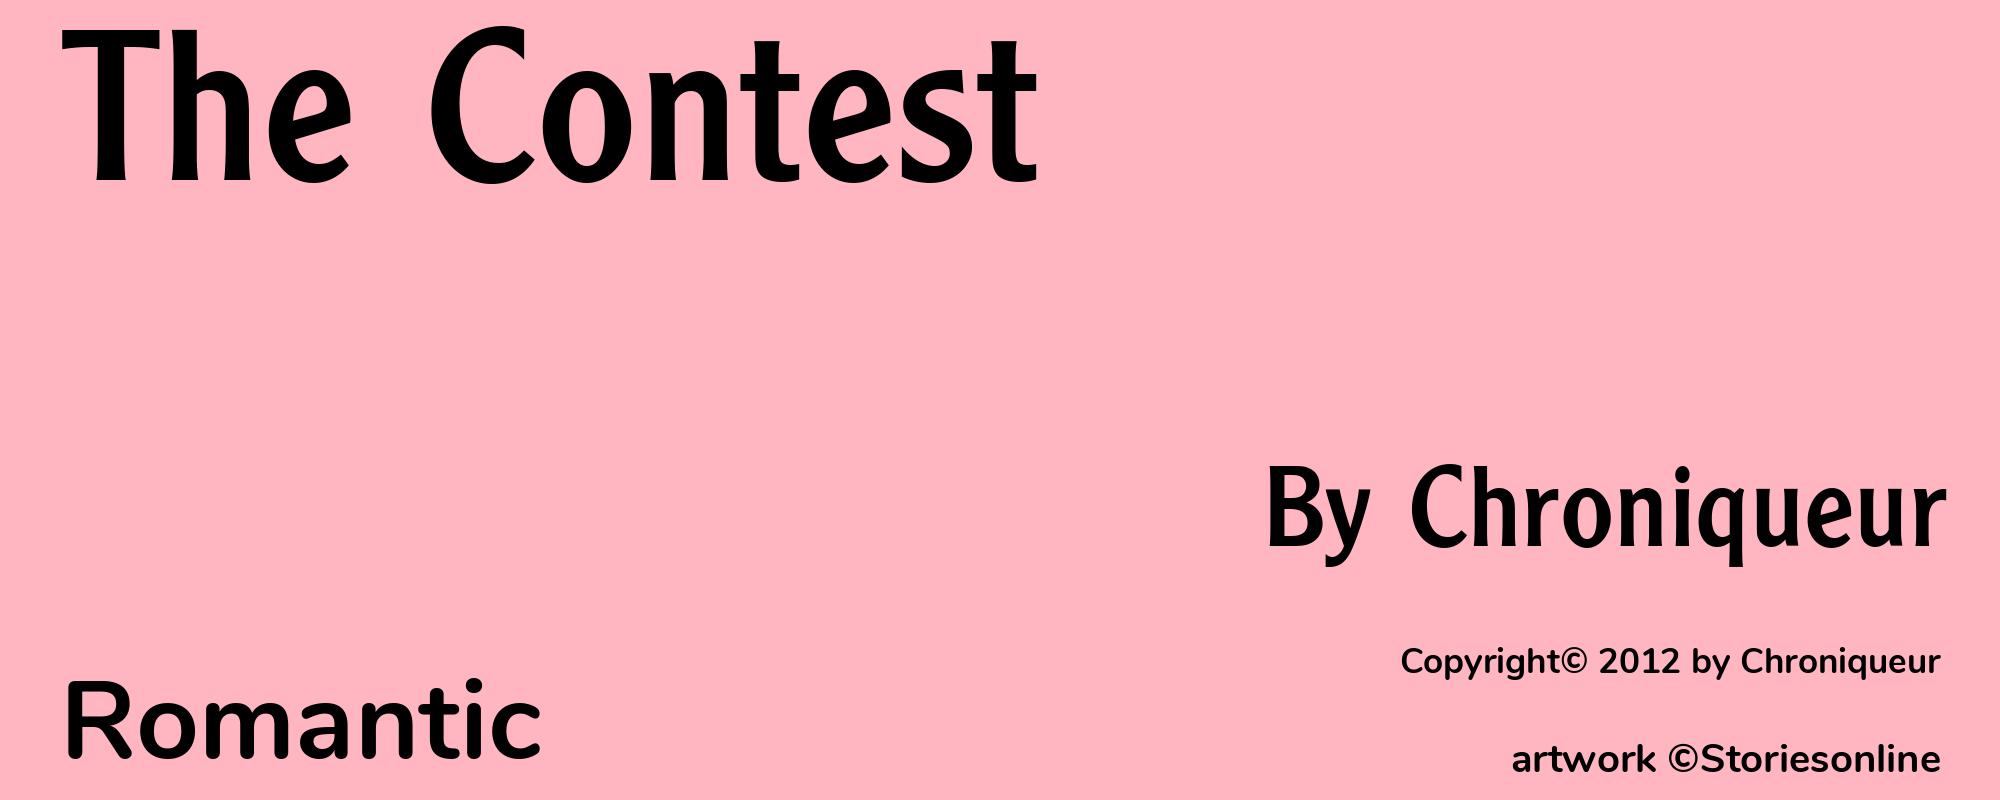 The Contest - Cover